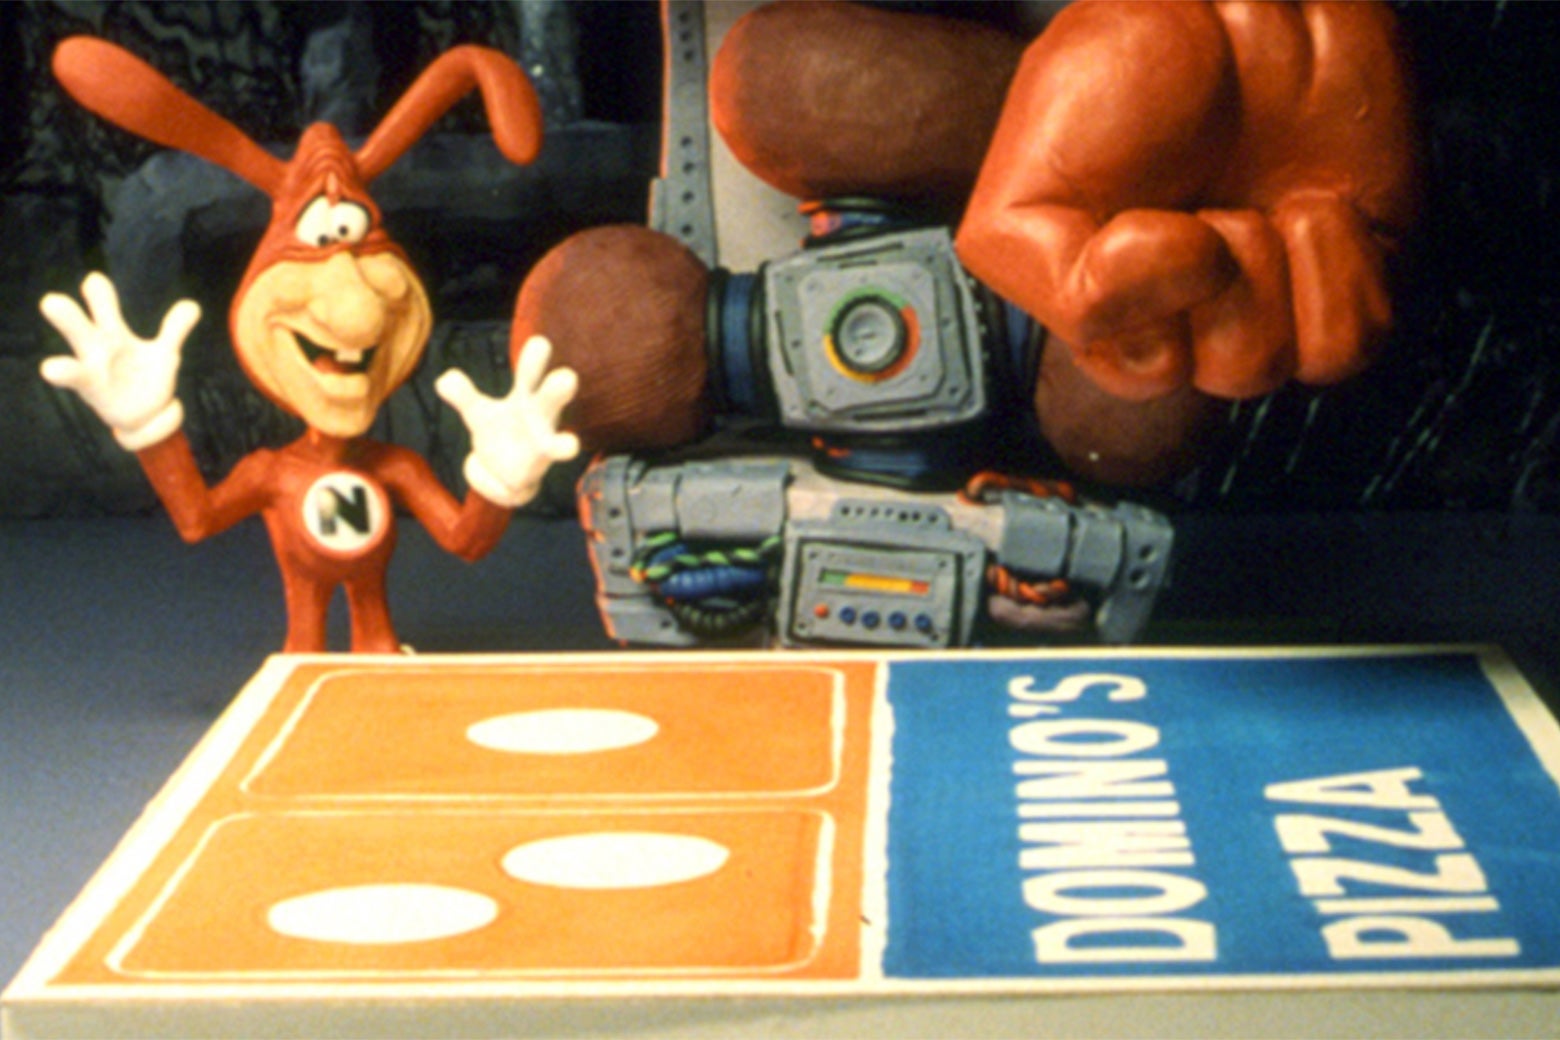 The Domino's noid in a 1980s ad. The noid is a tiny humanoid creature dressed in a red Spandex suit. It has a mask and red bunny ears that are also part of the suit. It has a human face with a big nose and wears white gloves. It stands over a Dominos Pizza box. A gloved human hand hovers off-screen at the top.